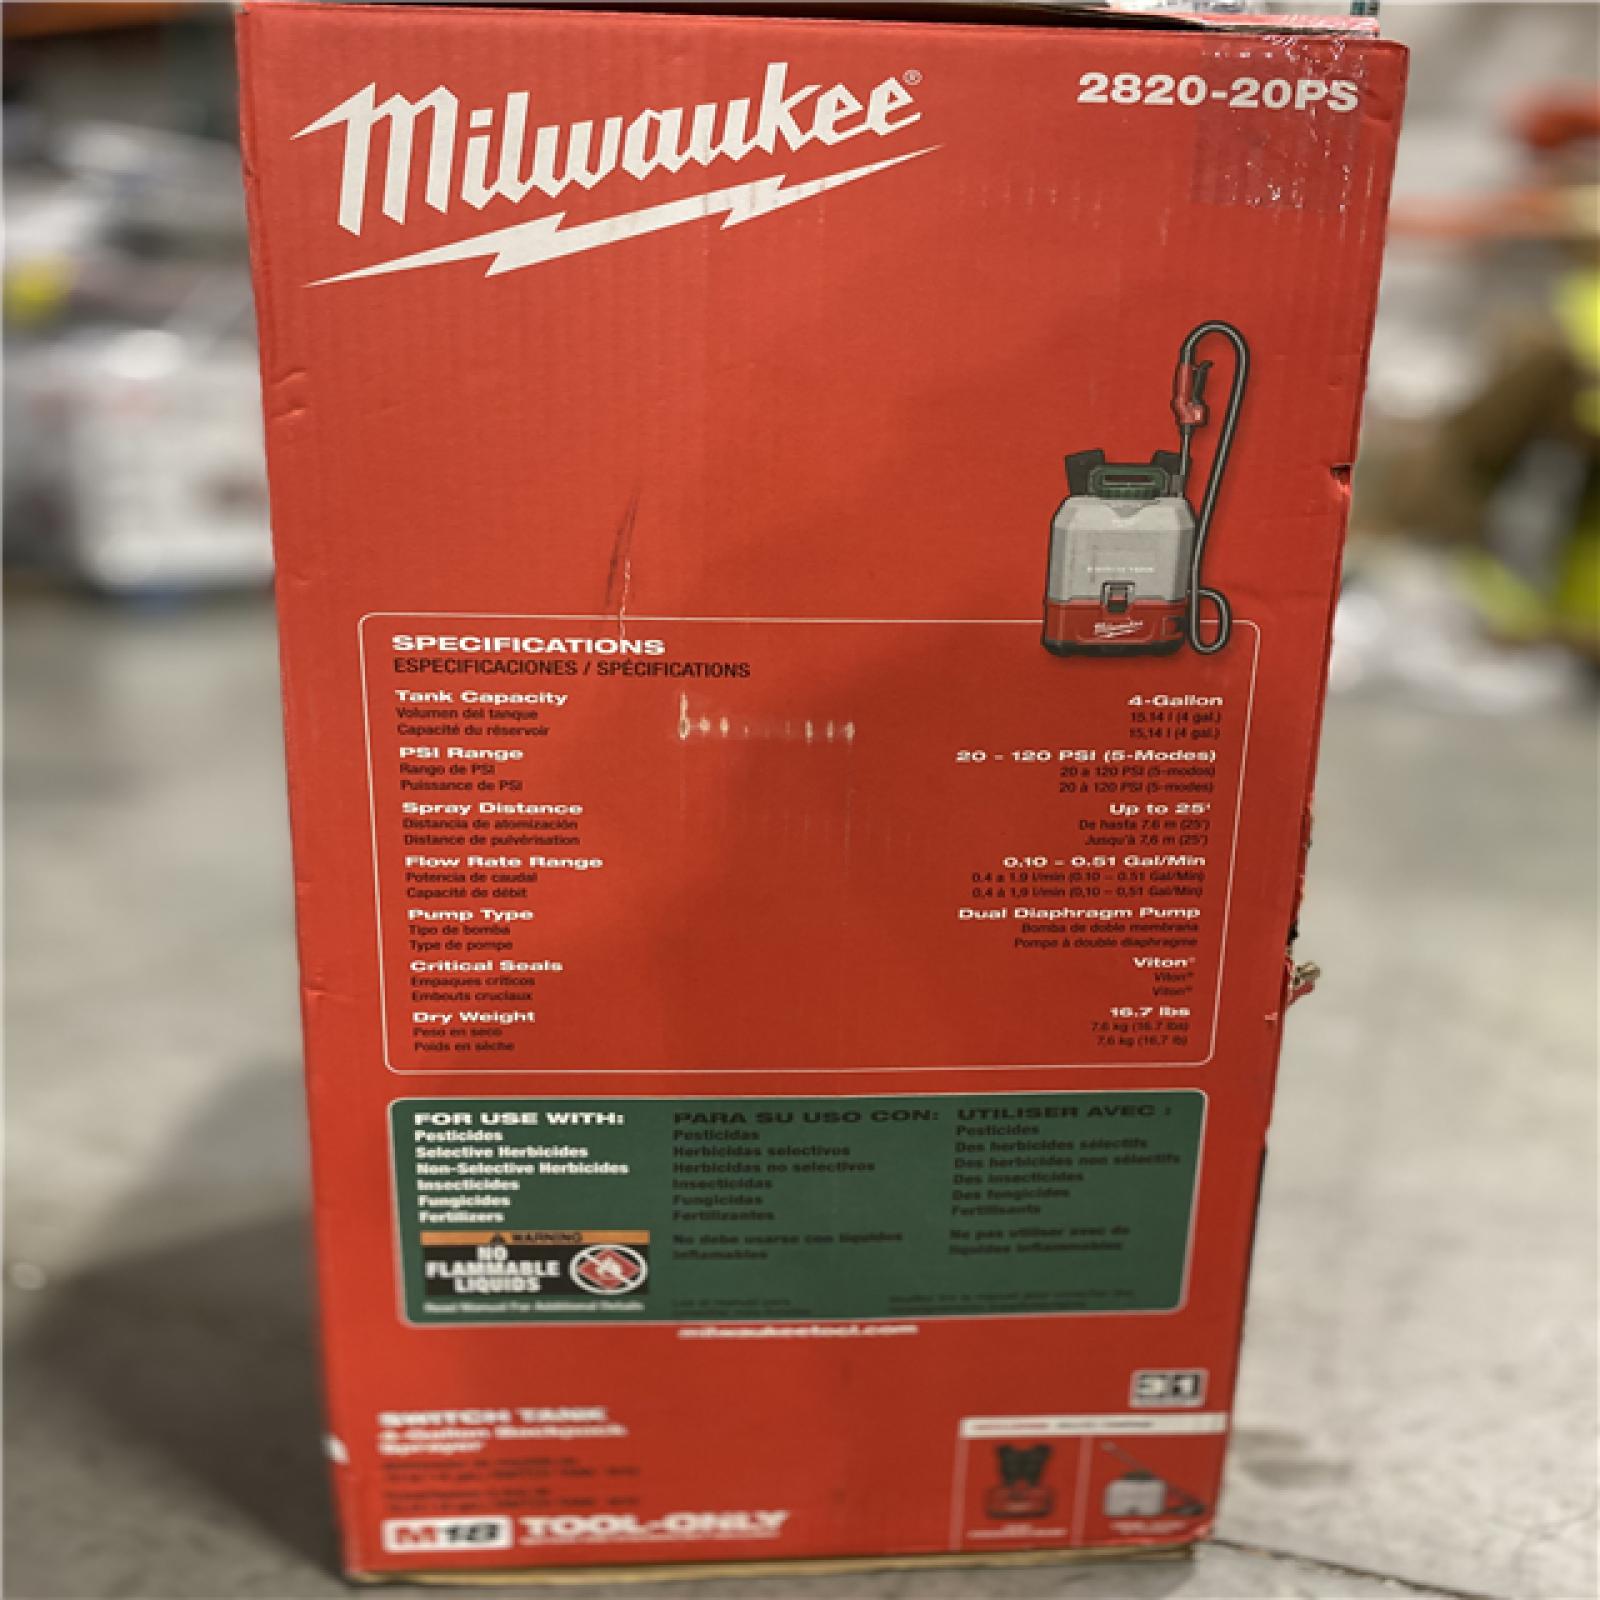 NEW! - Milwaukee M18 18-Volt 4 Gal. Lithium-Ion Cordless Switch Tank Backpack Pesticide Sprayer (Tool-Only)